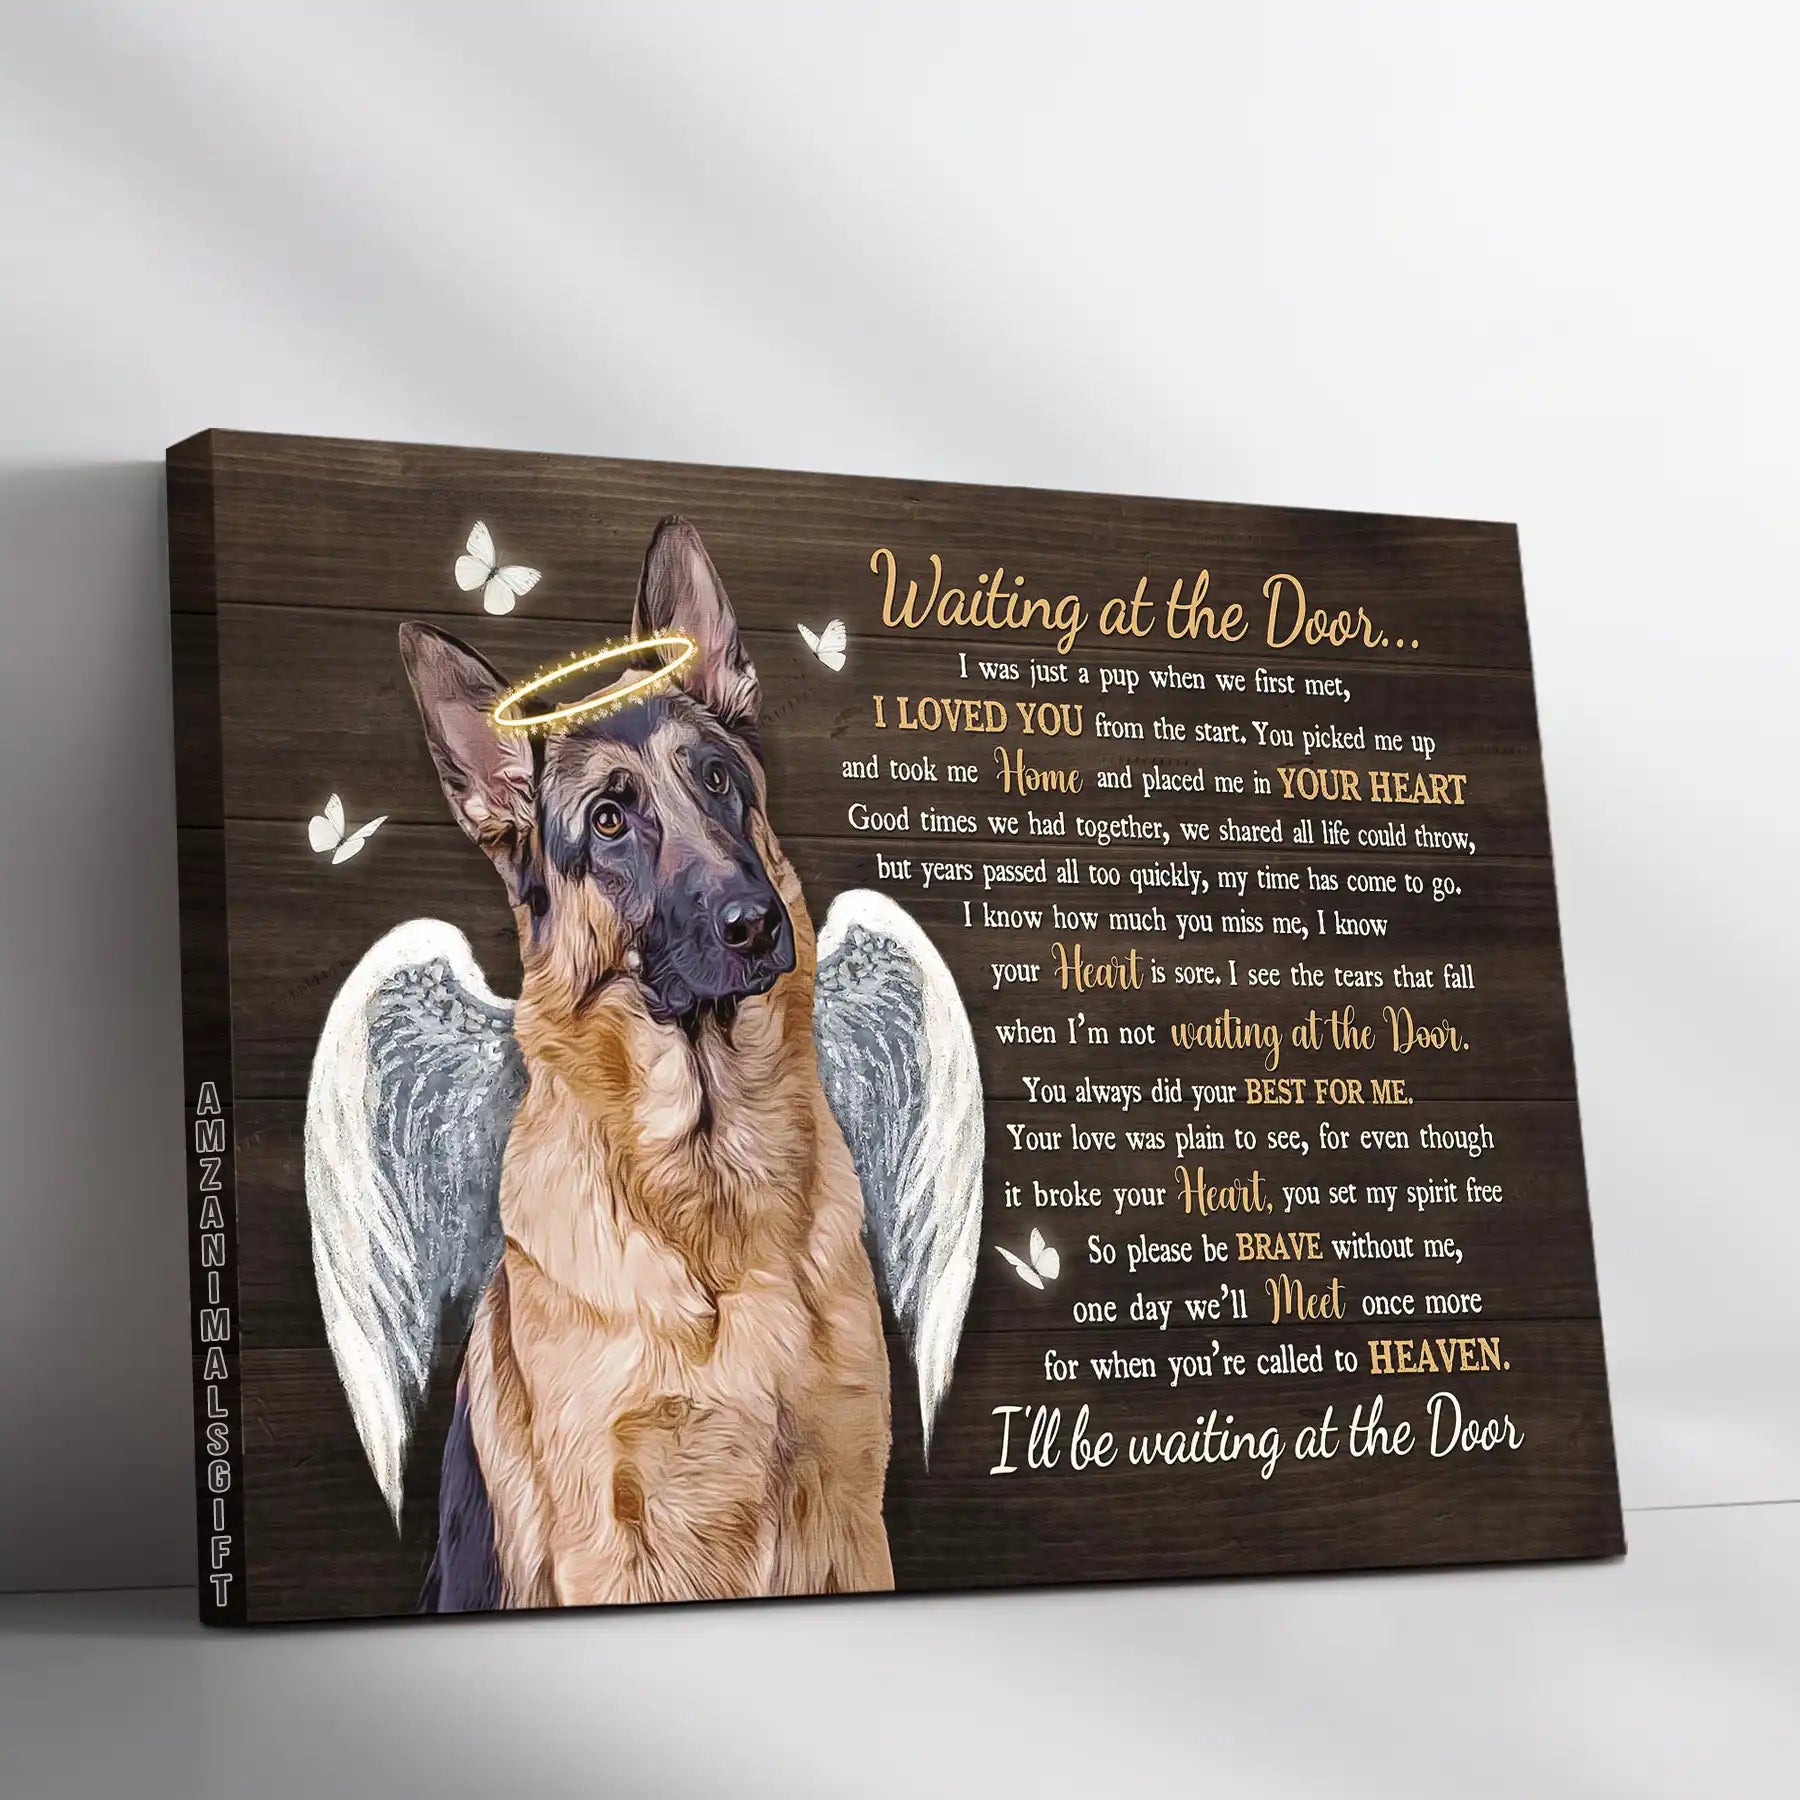 Memorial Premium Wrapped Landscape Canvas - German Shepherd Dog, Angel Wreath, Waiting At The Door - Heaven Gifts For Dog Lovers, Members Family - Amzanimalsgift